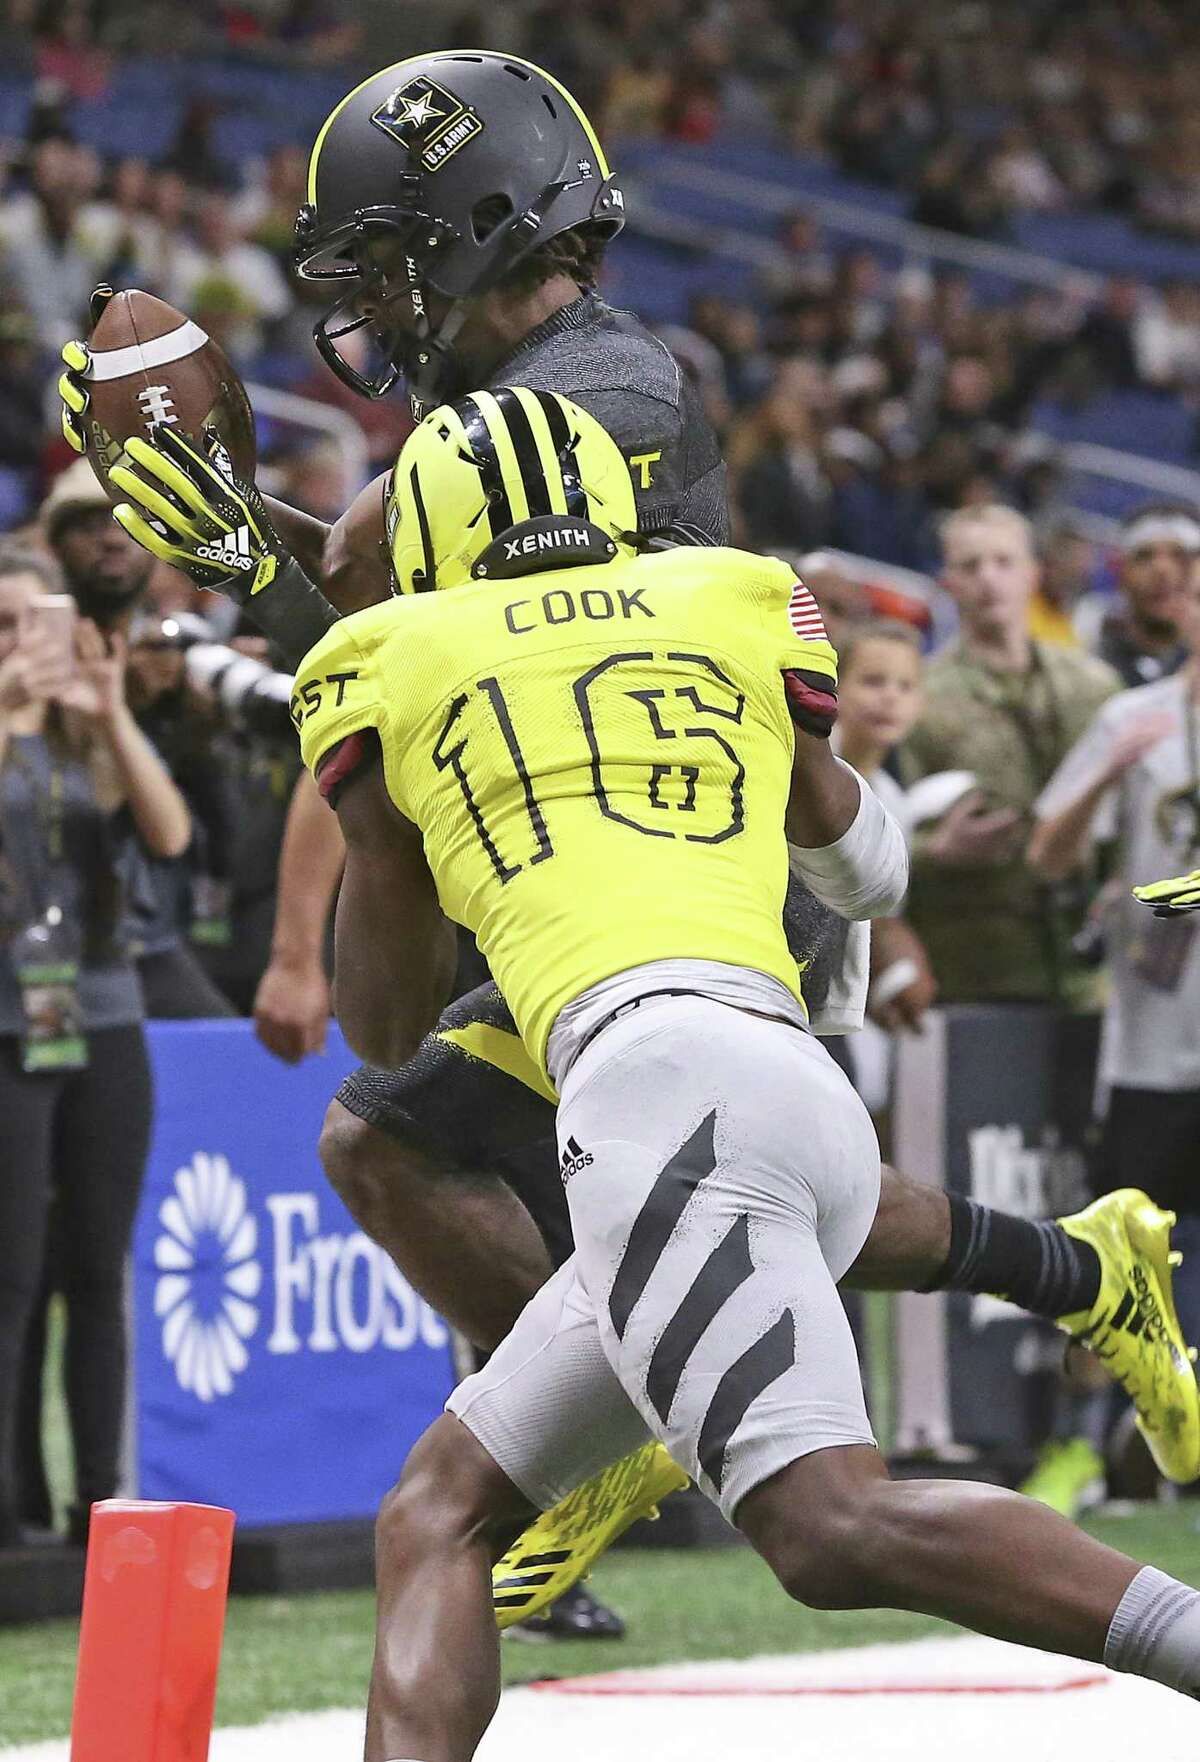 James Cook slips in for an East touchdown in front of Anthony Cook at the U.S. Army All-American Bowl at the Alamodome on January 6, 2018